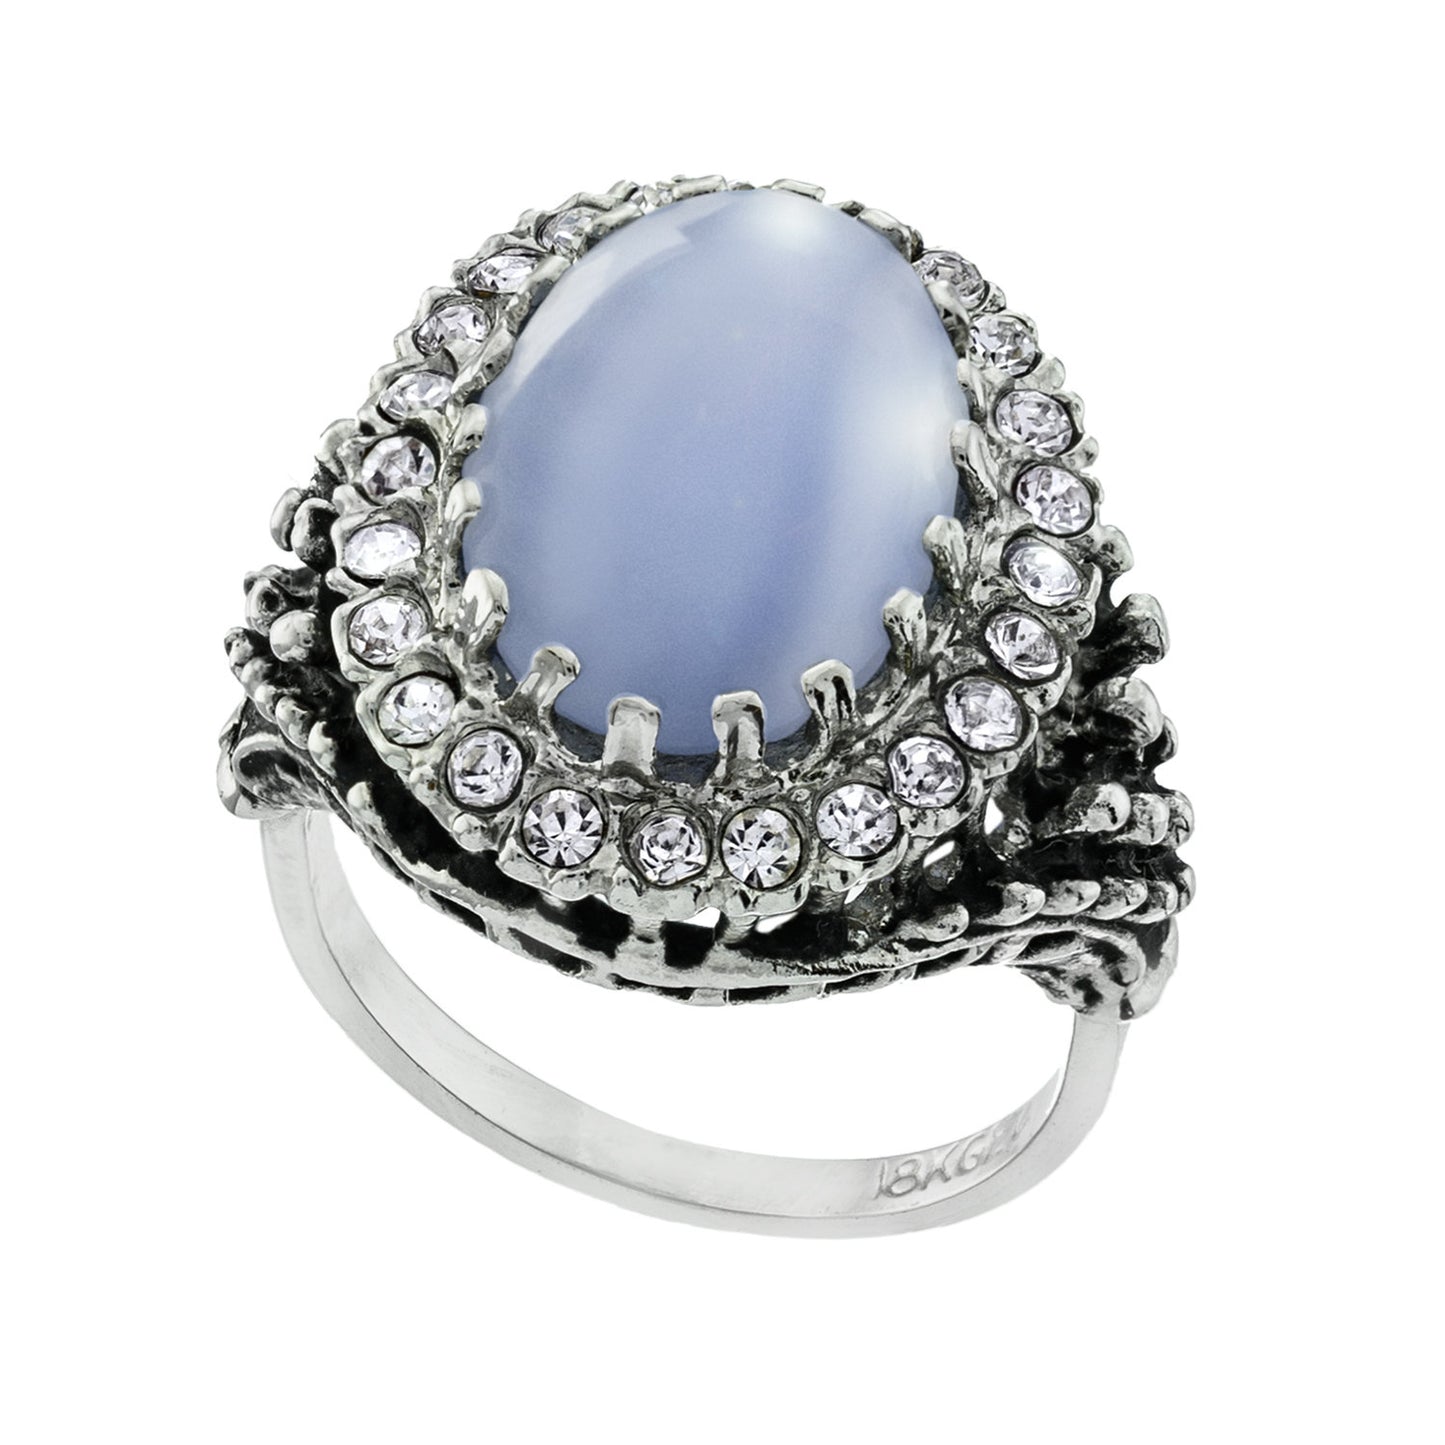 vintage-blue-moonstone-clear-Austrian-crystal-ring-edwardian-style-antique-white-gold-plated